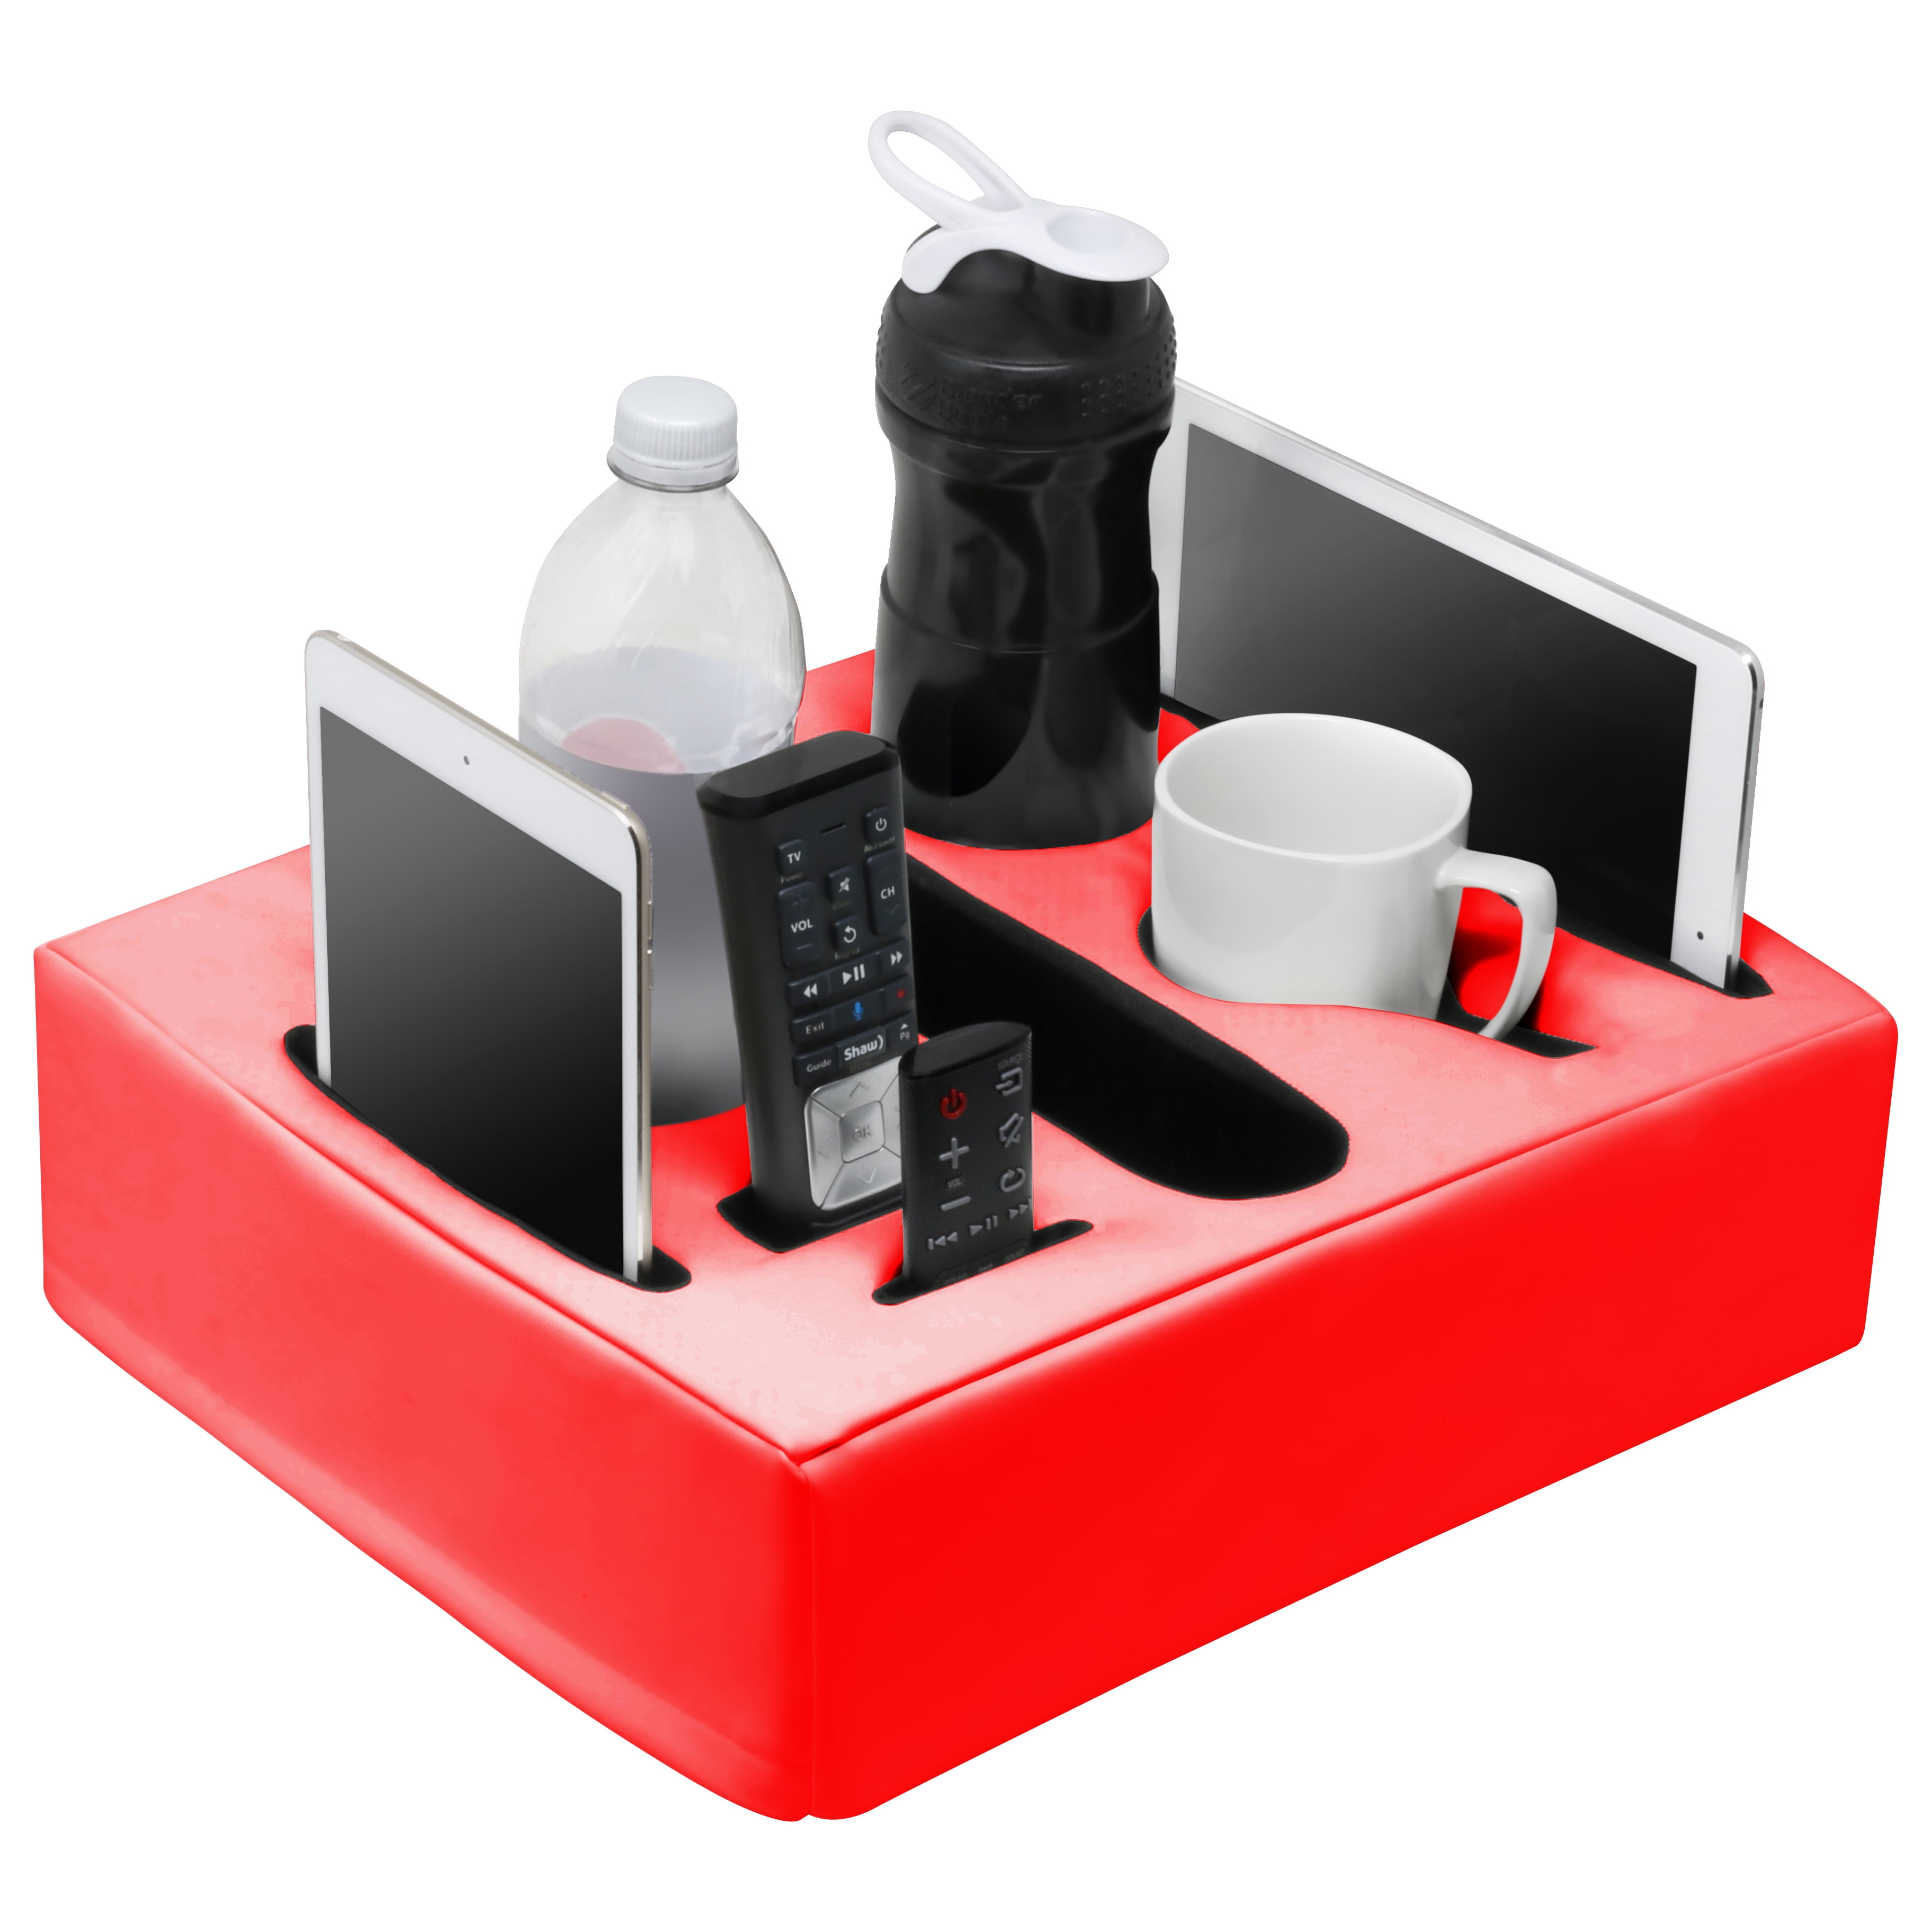 MOOKUNDY - Introducing Sofa Buddy - Convenient Couch Cup Holder, Couch  Caddy, Sofa Cup Holder. The Perfect Couch Accessory 